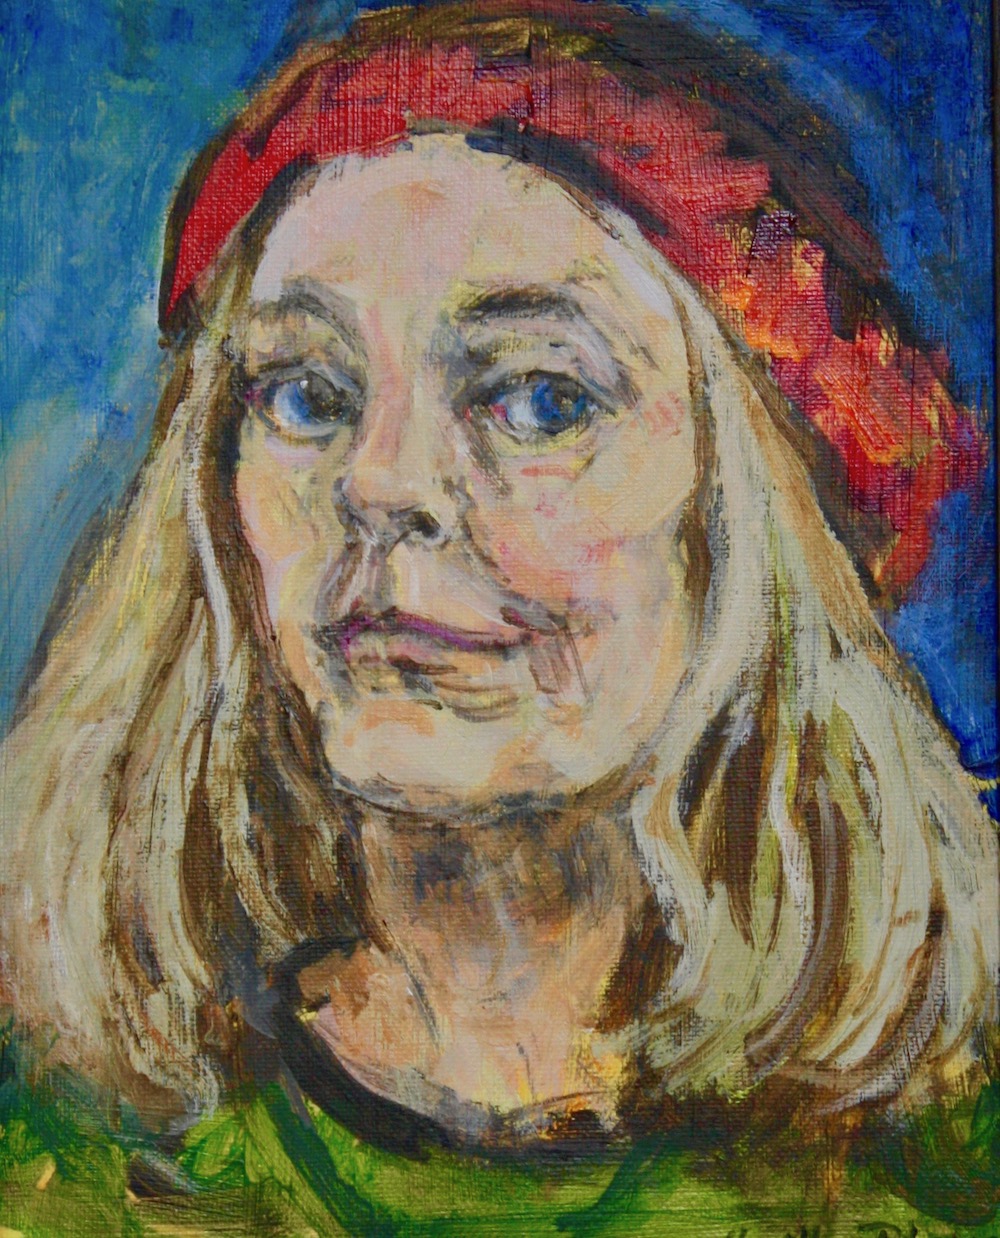 “Red Beret”, oil on canvas, 10”H x 8”W, 2016